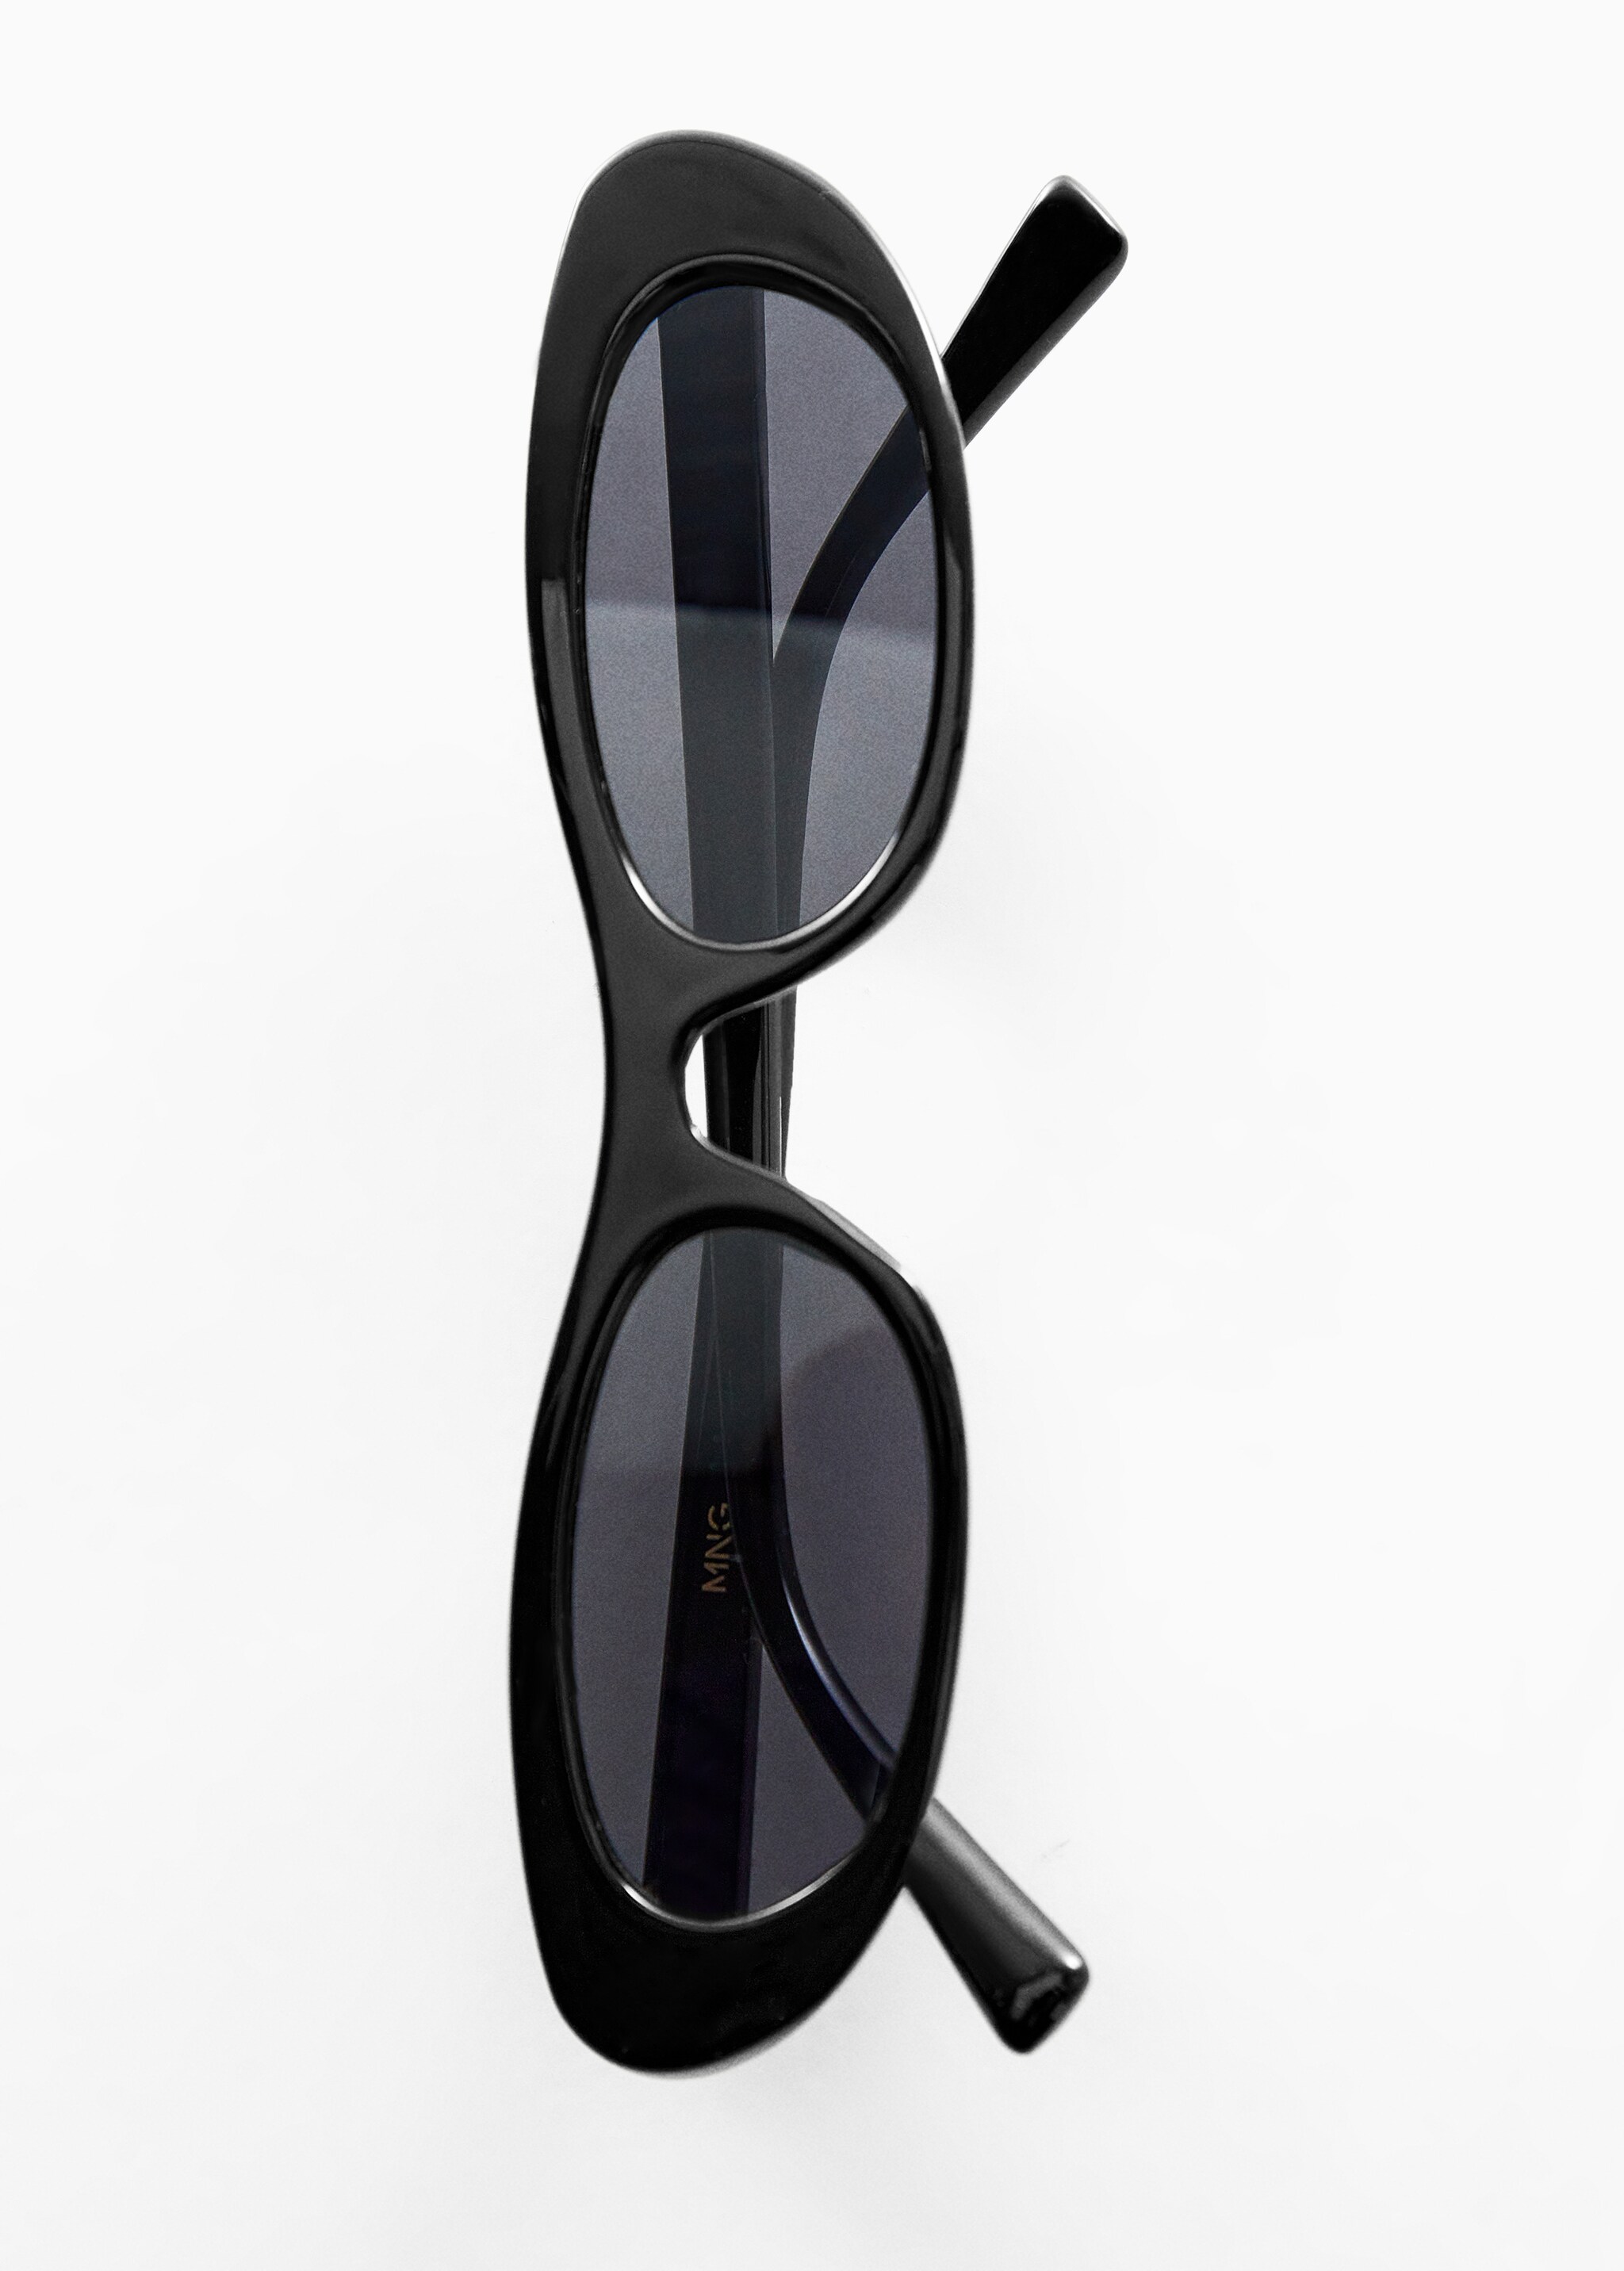 Oval sunglasses - Details of the article 5